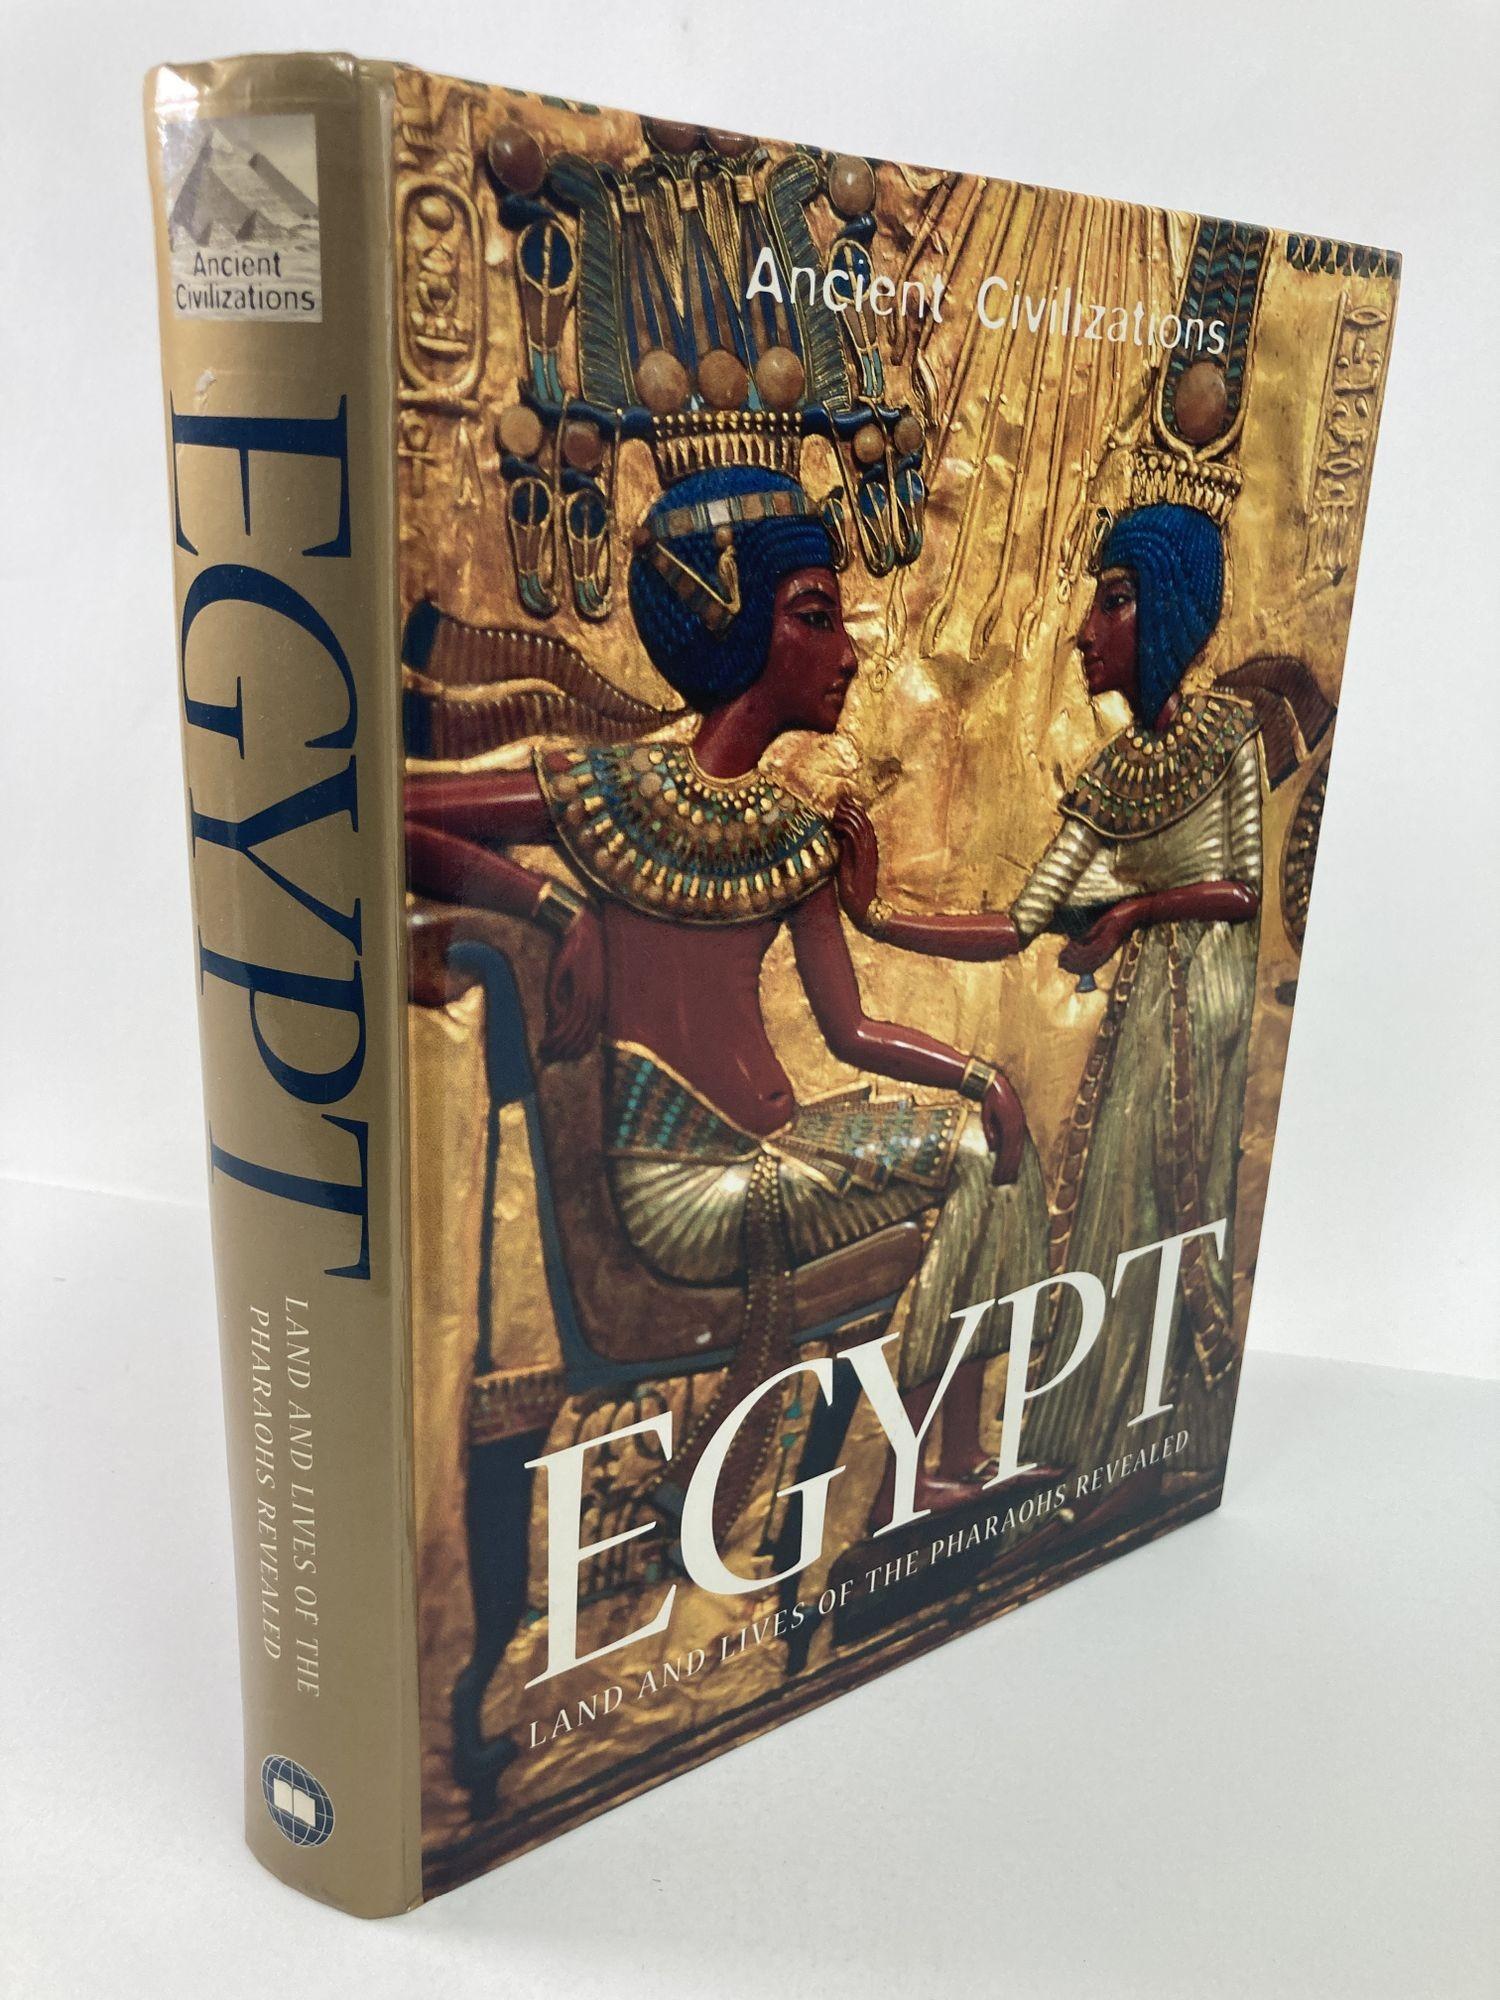 Egypt: Land and Lives of the Pharaohs Revealed Hardcover Book by Cheryl Perry.
Published 1st edition 2005.
Best Ancient Egyptian History book, It covers not just the famous pharaohs, but the history of Egypt and human culture there in earlier